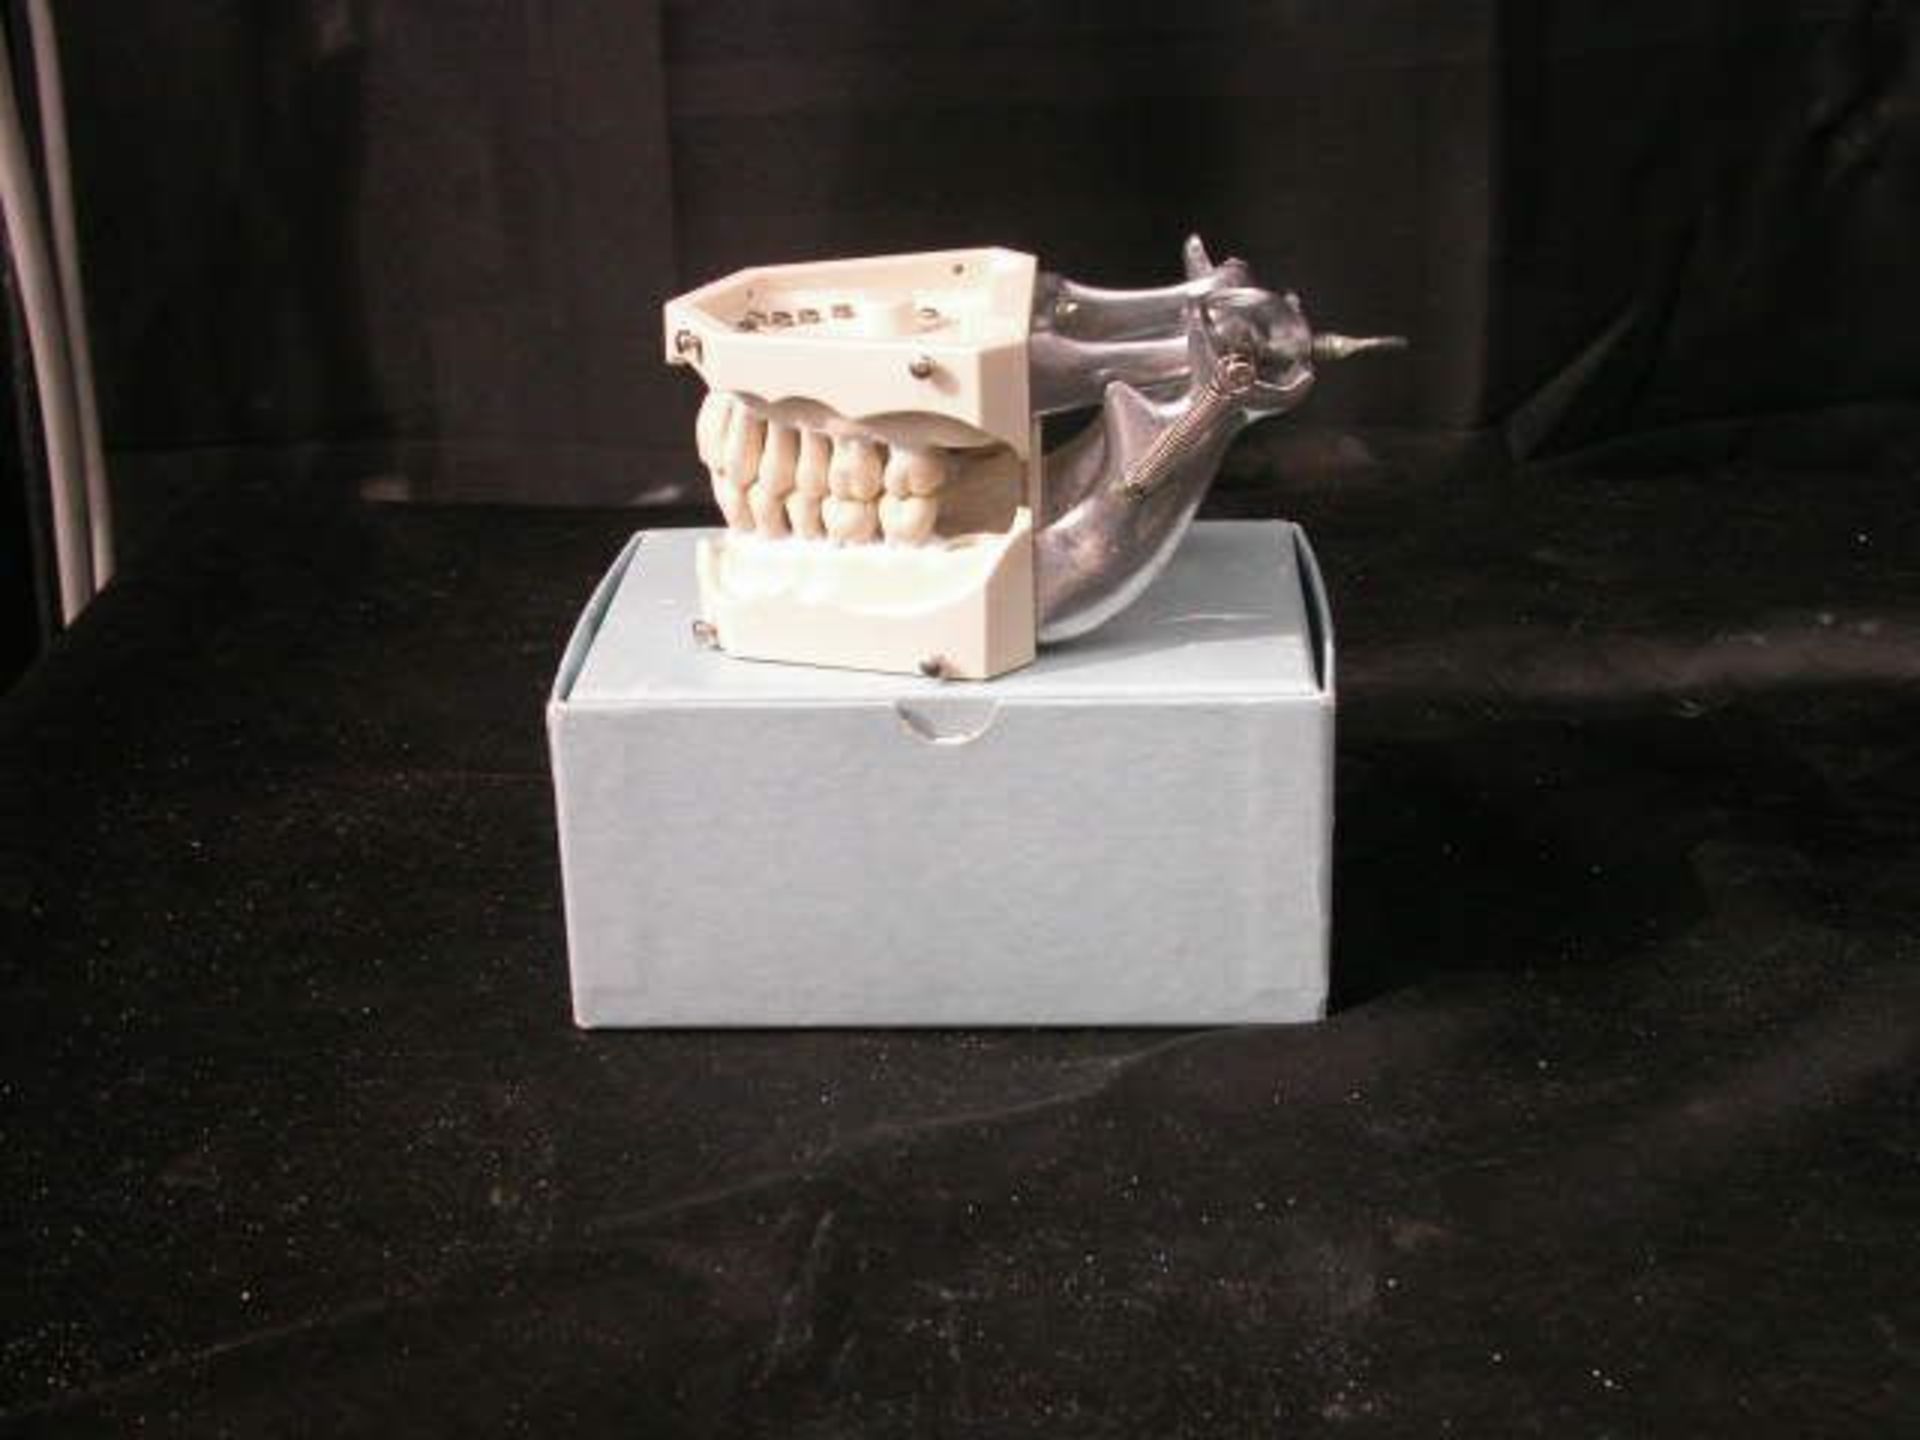 Columbia Dentiform Articulating Dental Model Removeable Teeth #2 4 Molars Gone, Qty 4, 330772226991 - Image 2 of 4